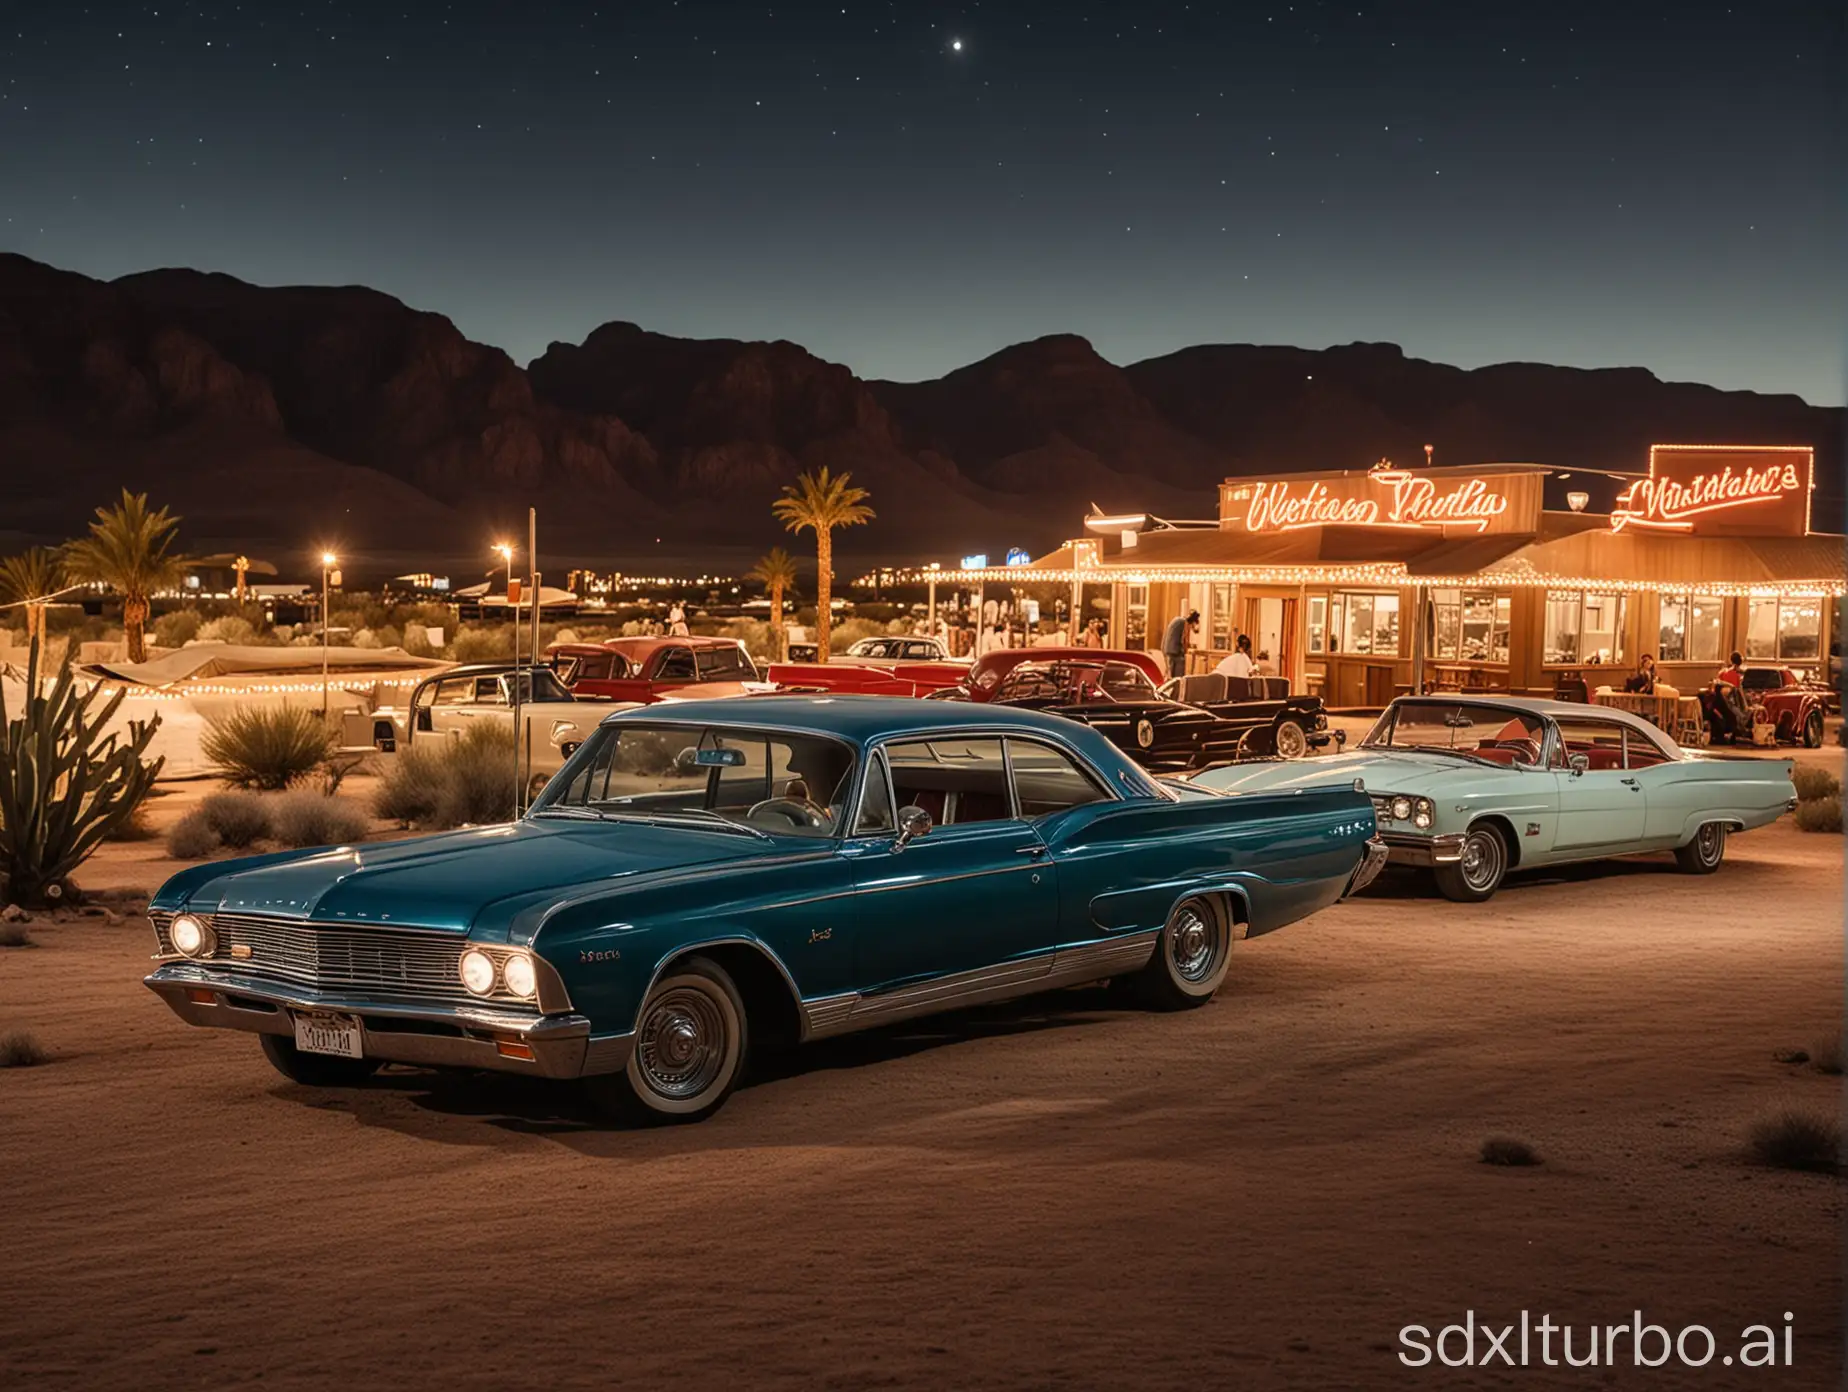 A photo of a dinner in a American desert at night with vintage cars and the background you can see Las Vegas